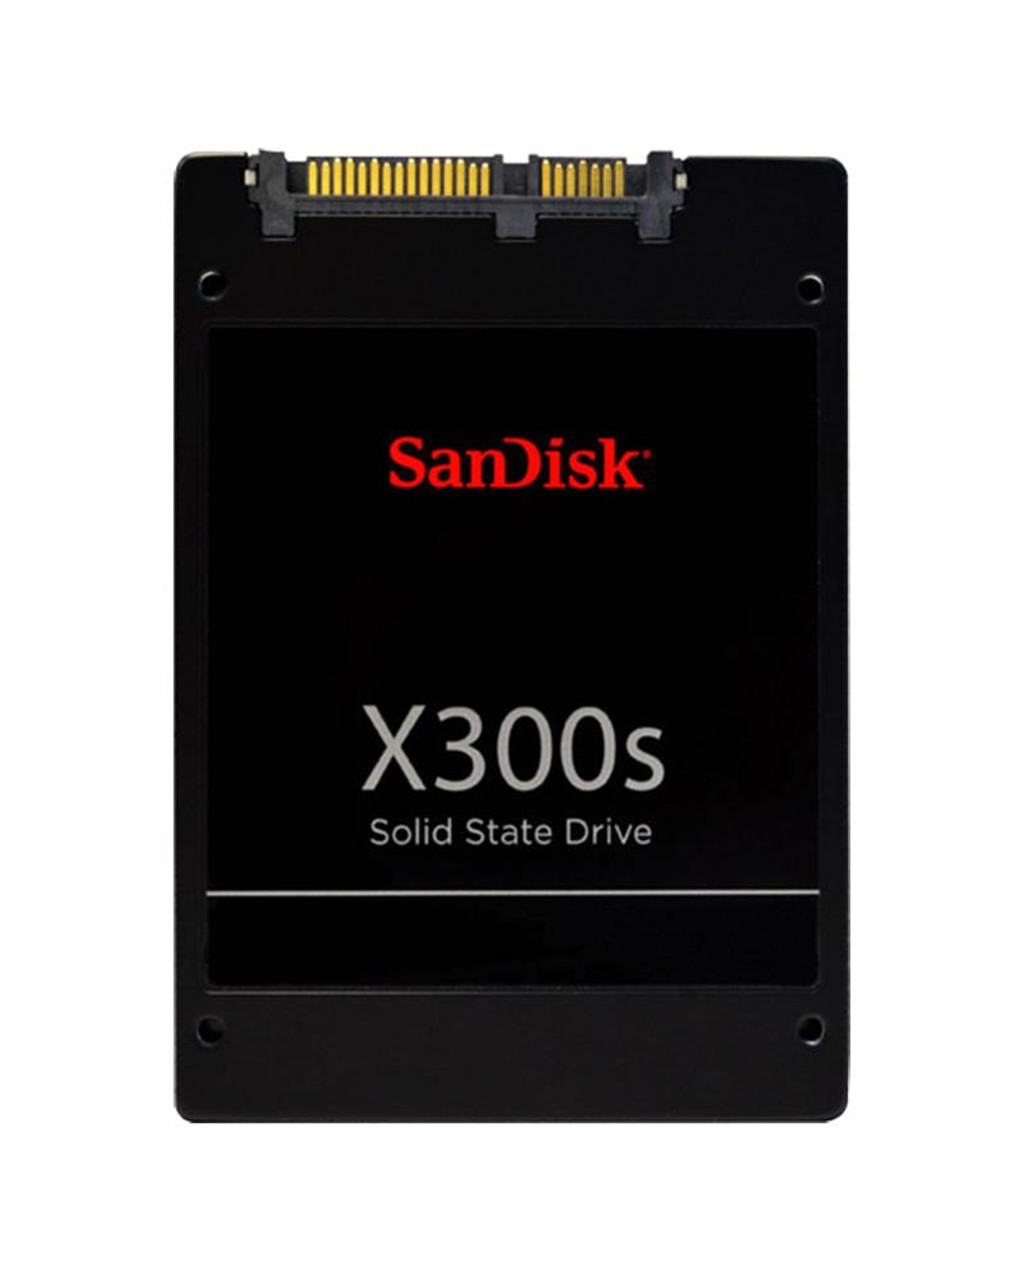 SD7SB3Q128G1006 SanDisk X300s 128GB MLC SATA 6Gbps (AES-256 / SE TCG Opal 2.0) 2.5-inch Internal Solid State Drive (SSD)